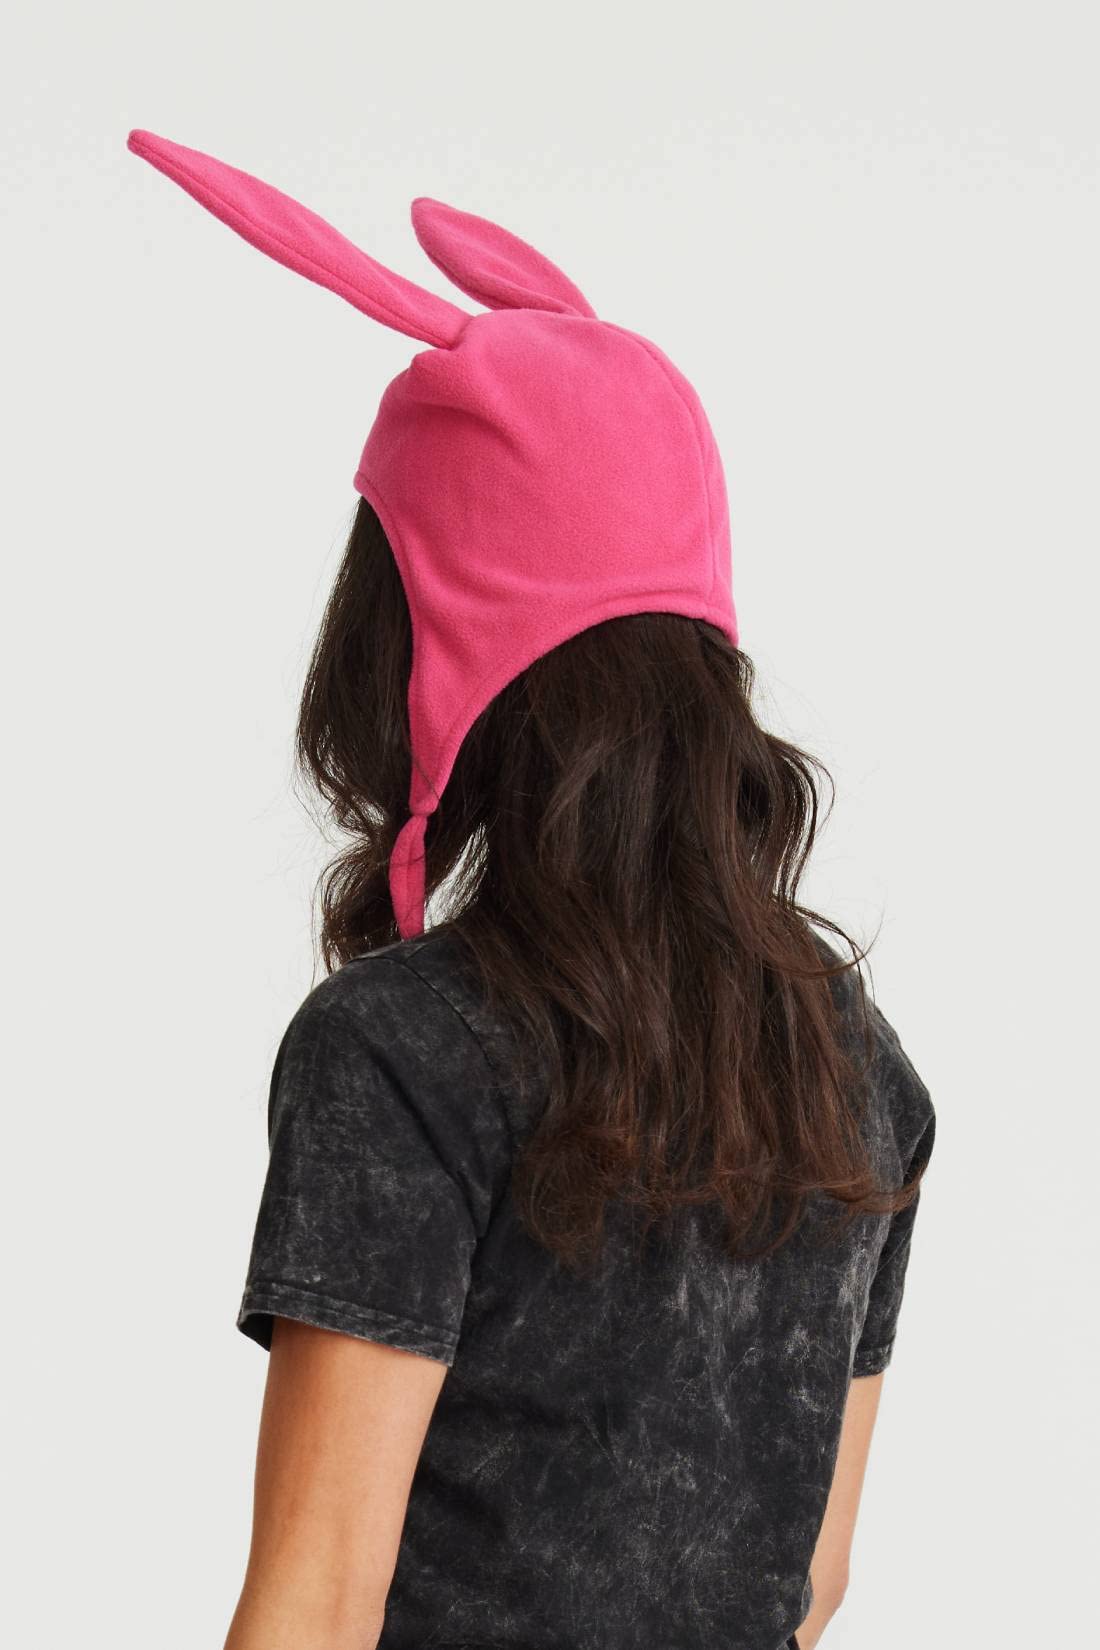 Ripple Junction Bob's Burgers Louise Beanie Hat, Adult One Size Pink